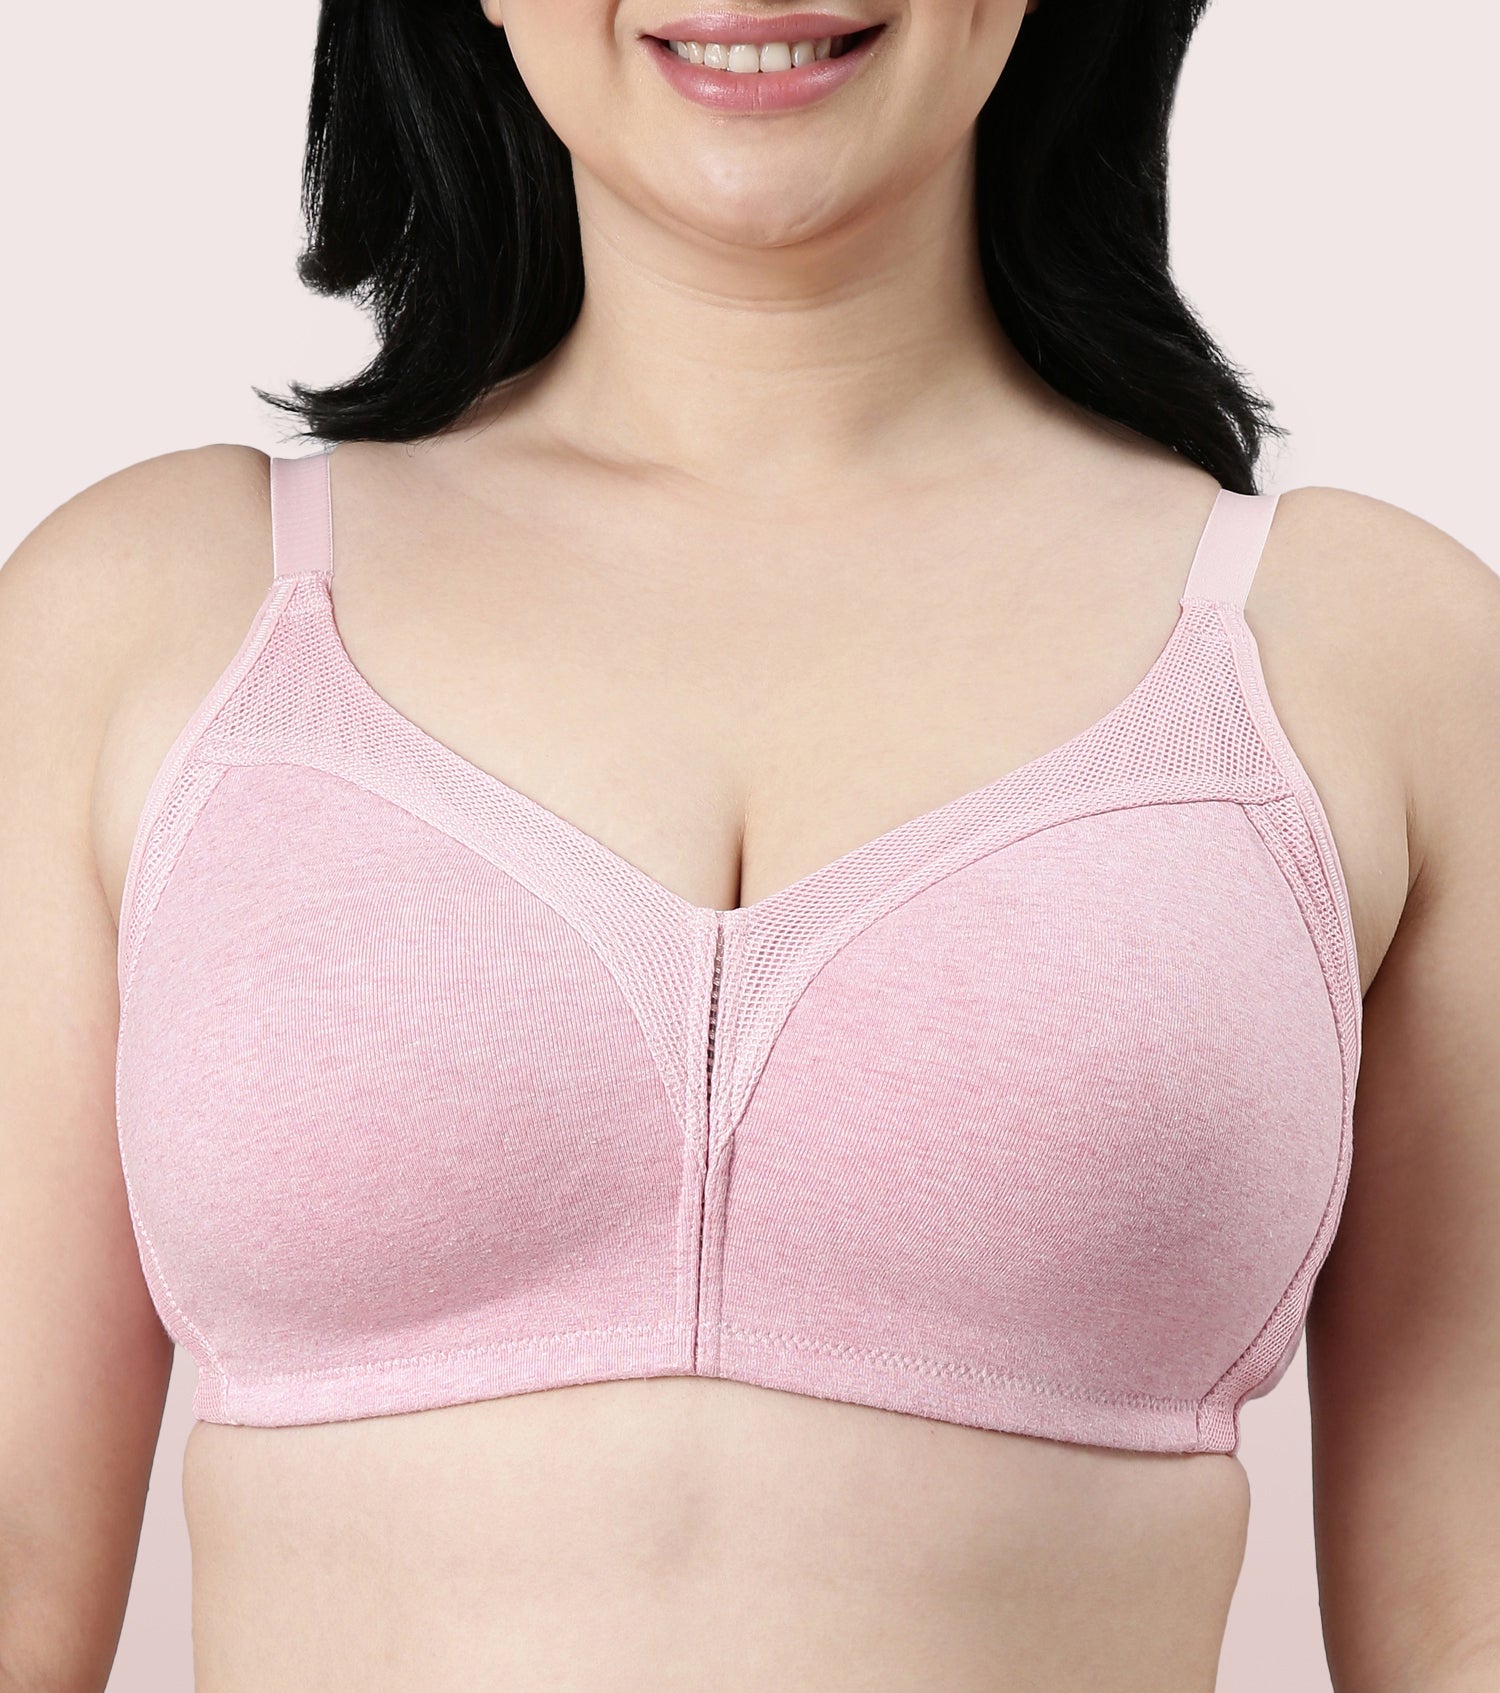 Enamor C Cup Size Bra Price Starting From Rs 200/Box